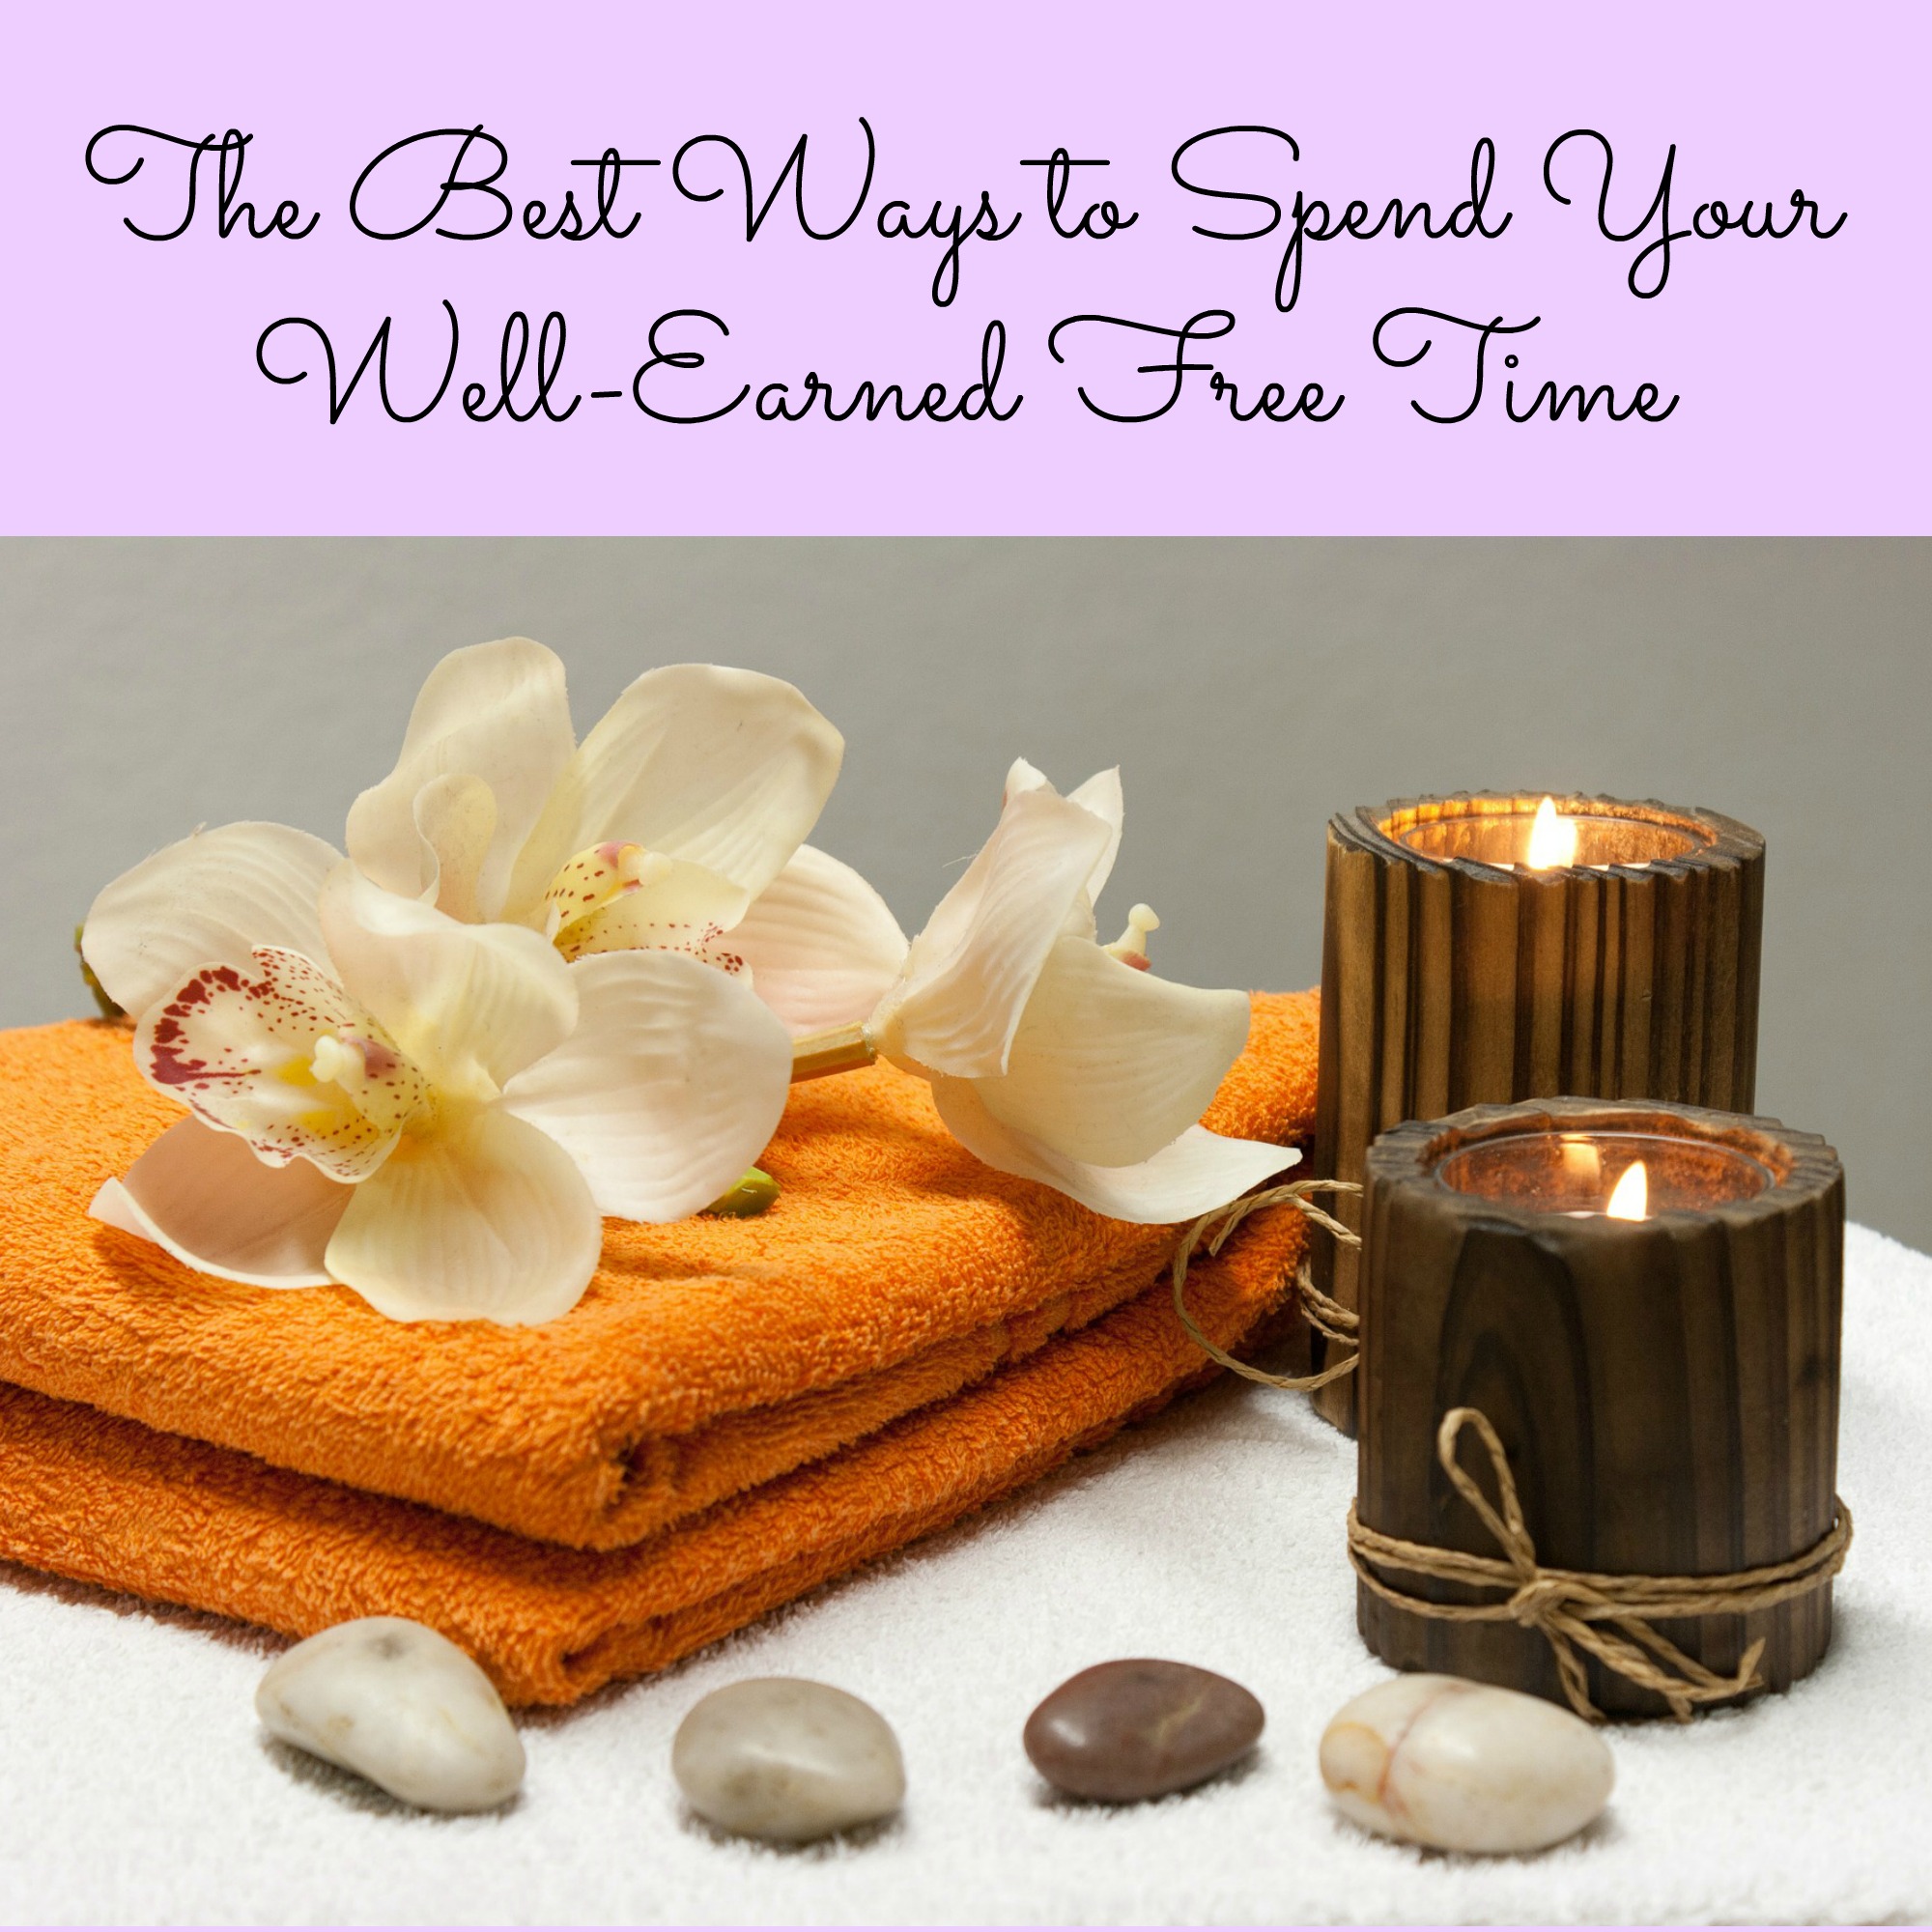 The Best Ways to Spend Your Well-Earned Free Time